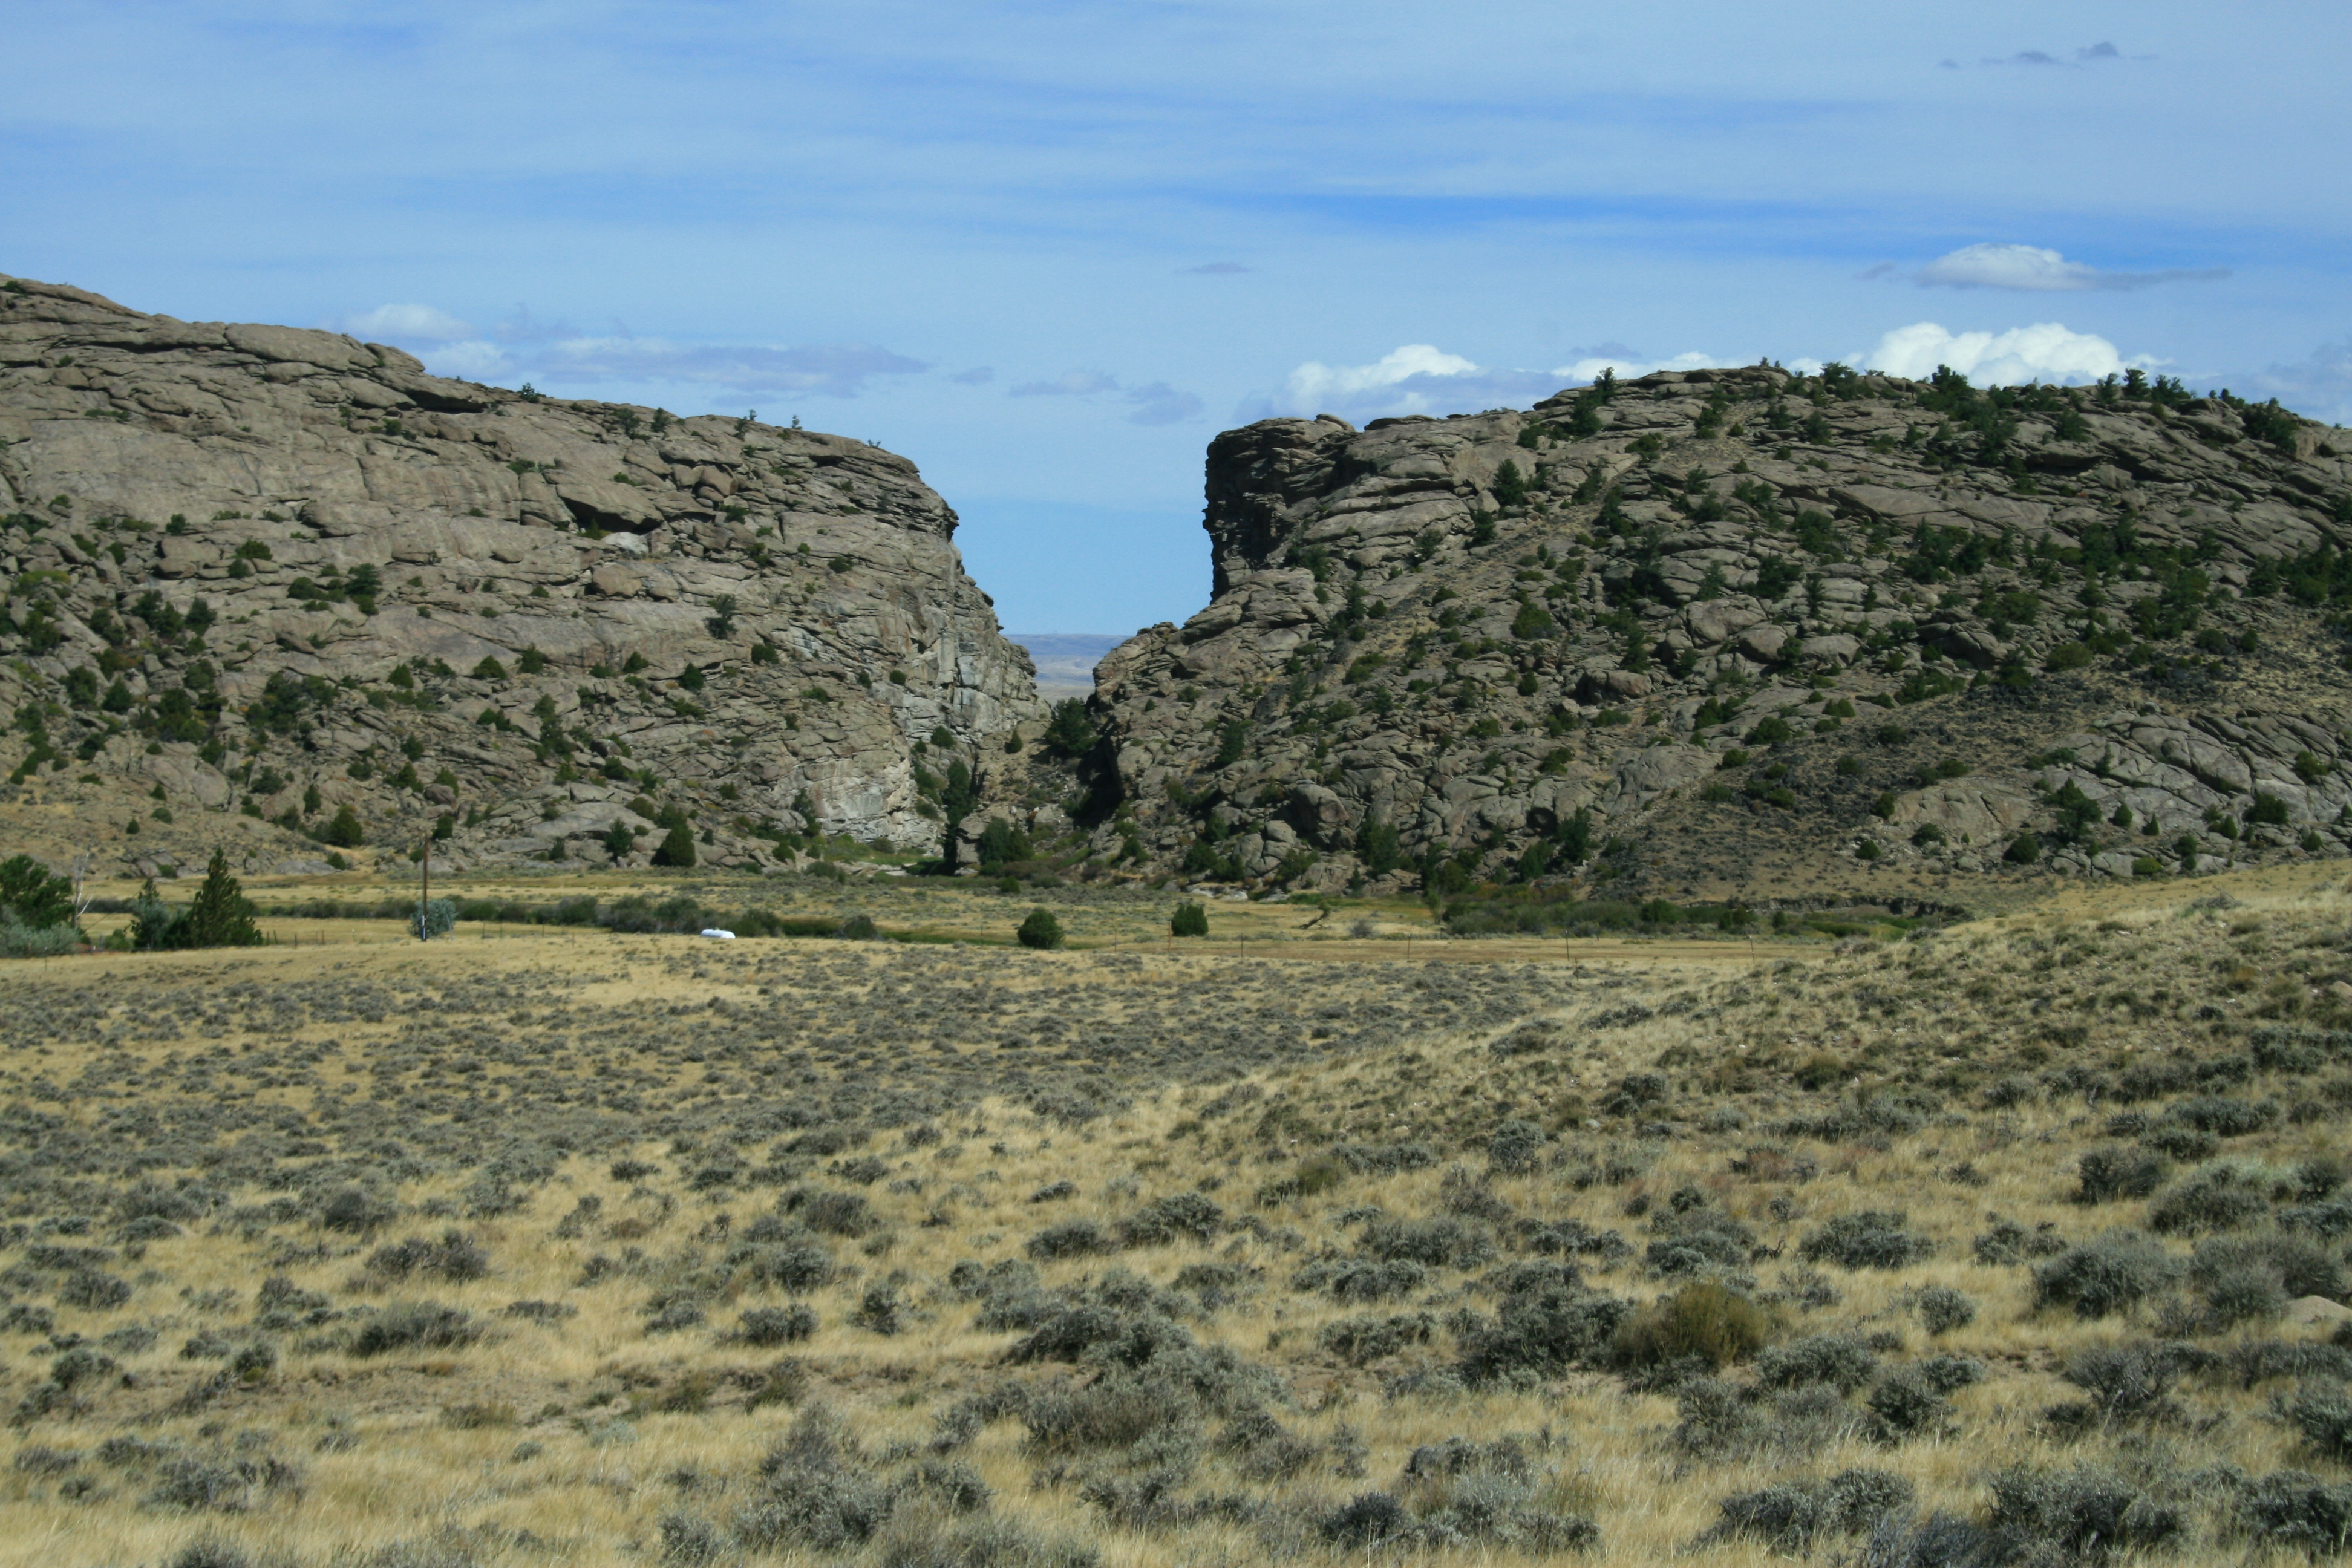 A tall rock buttress with a cleft in the center sits behind a sagebrush covered valley.